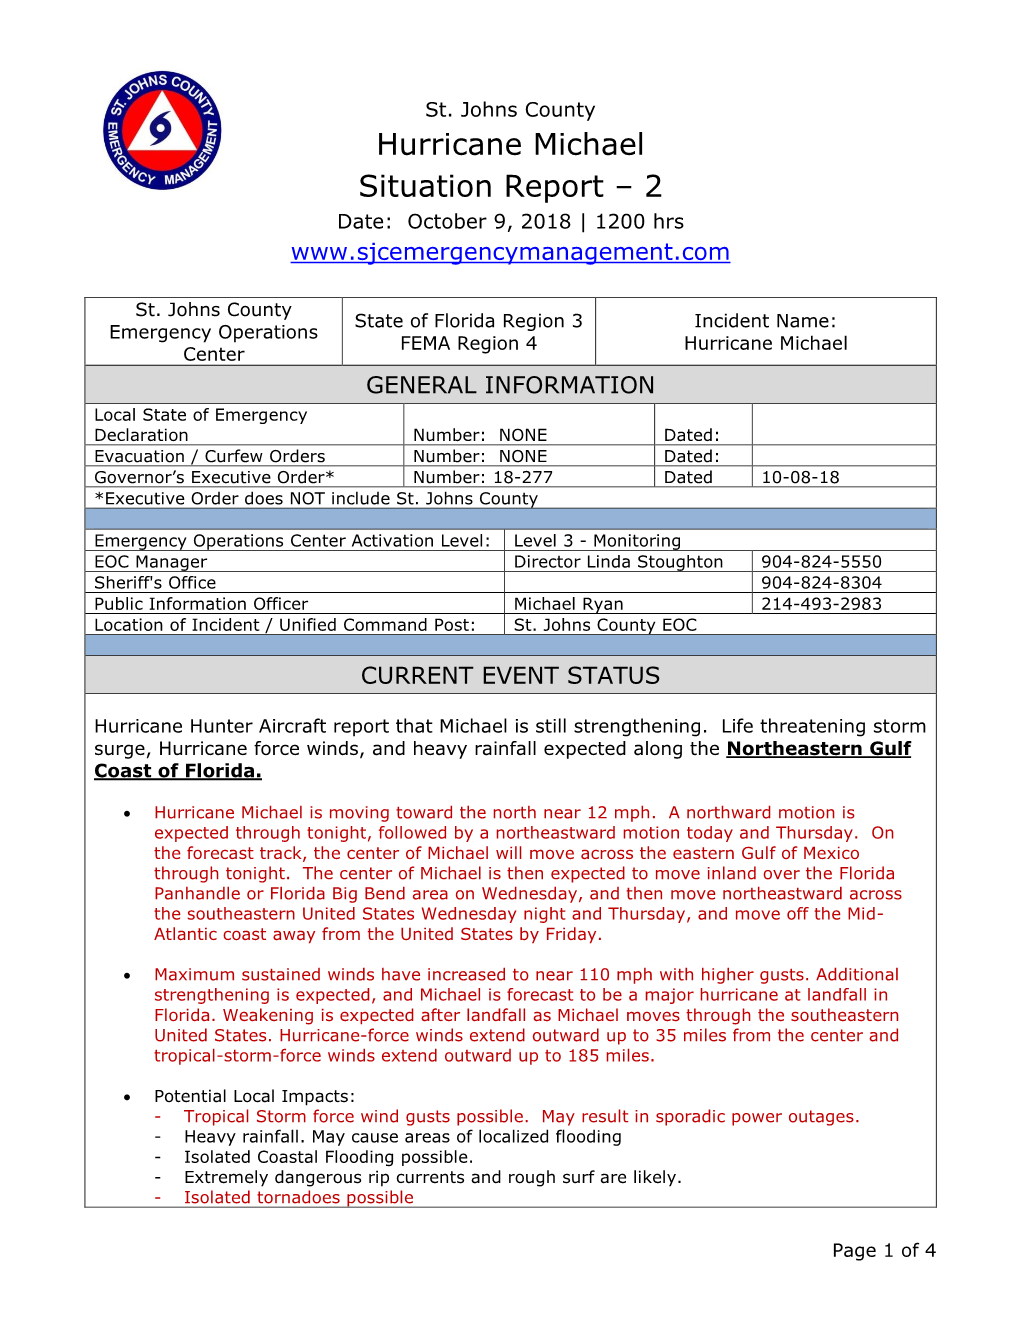 Hurricane Michael Situation Report – 2 Date: October 9, 2018 | 1200 Hrs